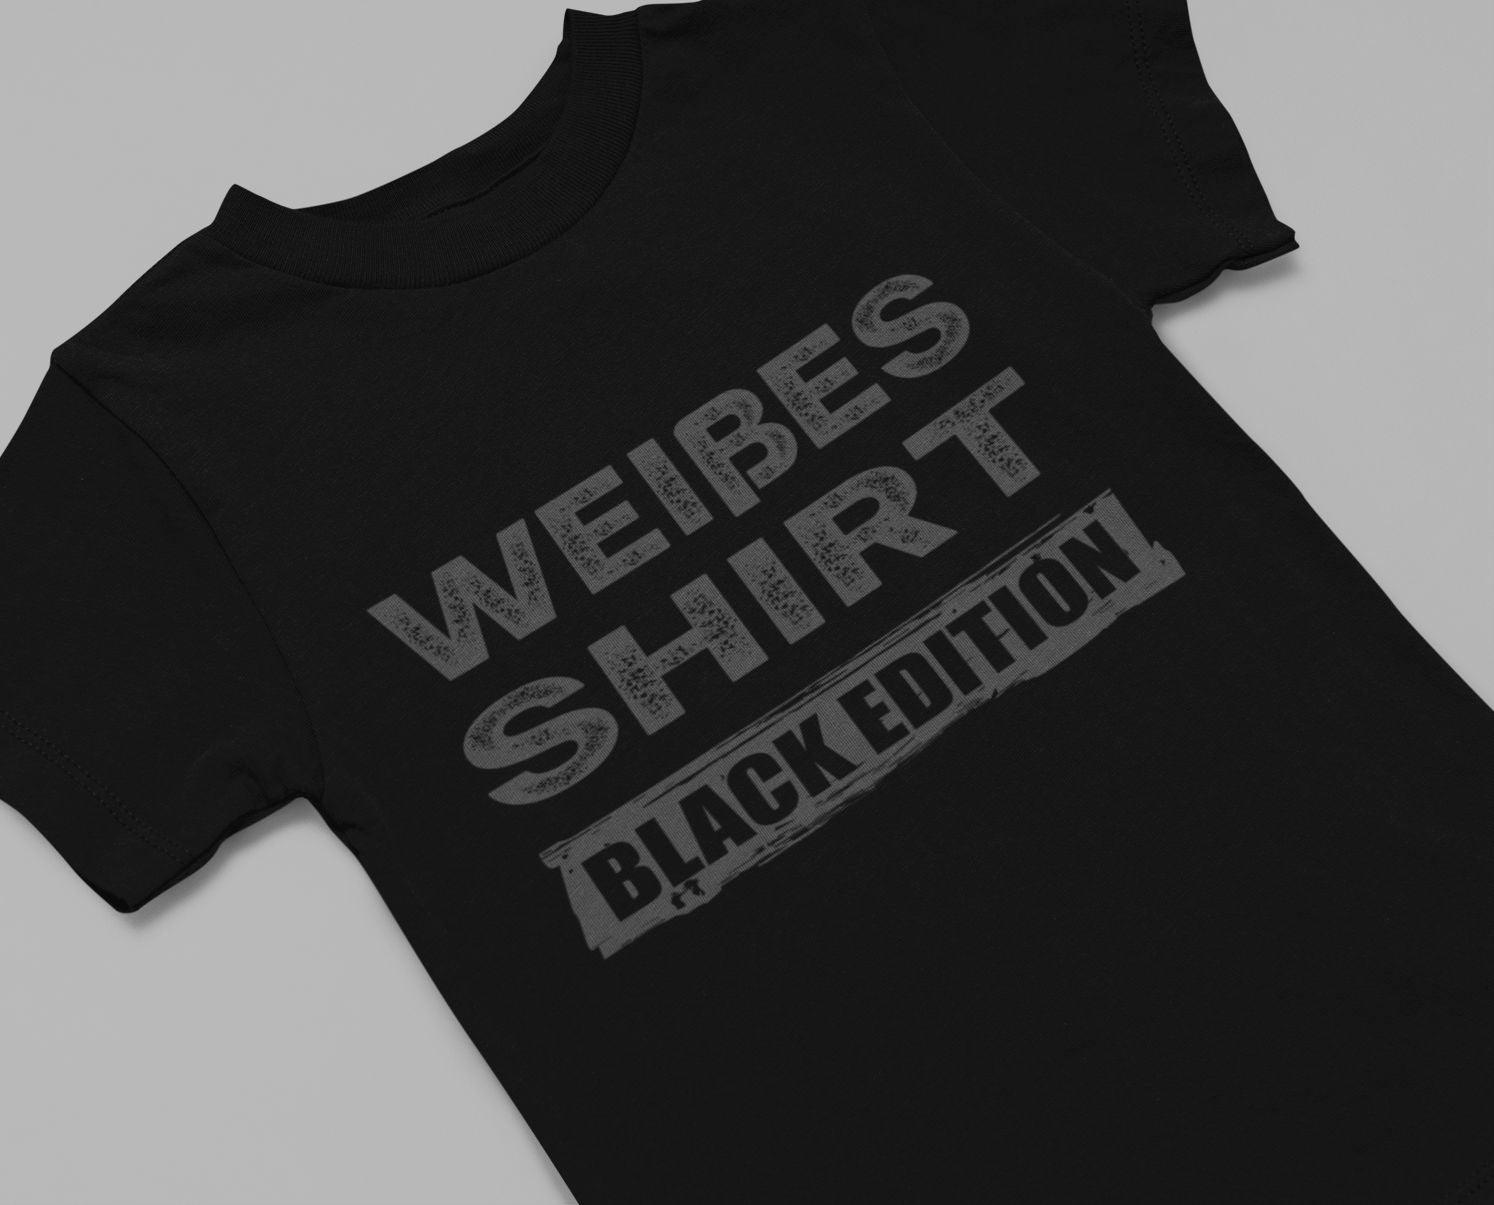 Weißes Shirt - Black Edition - Totally Wasted